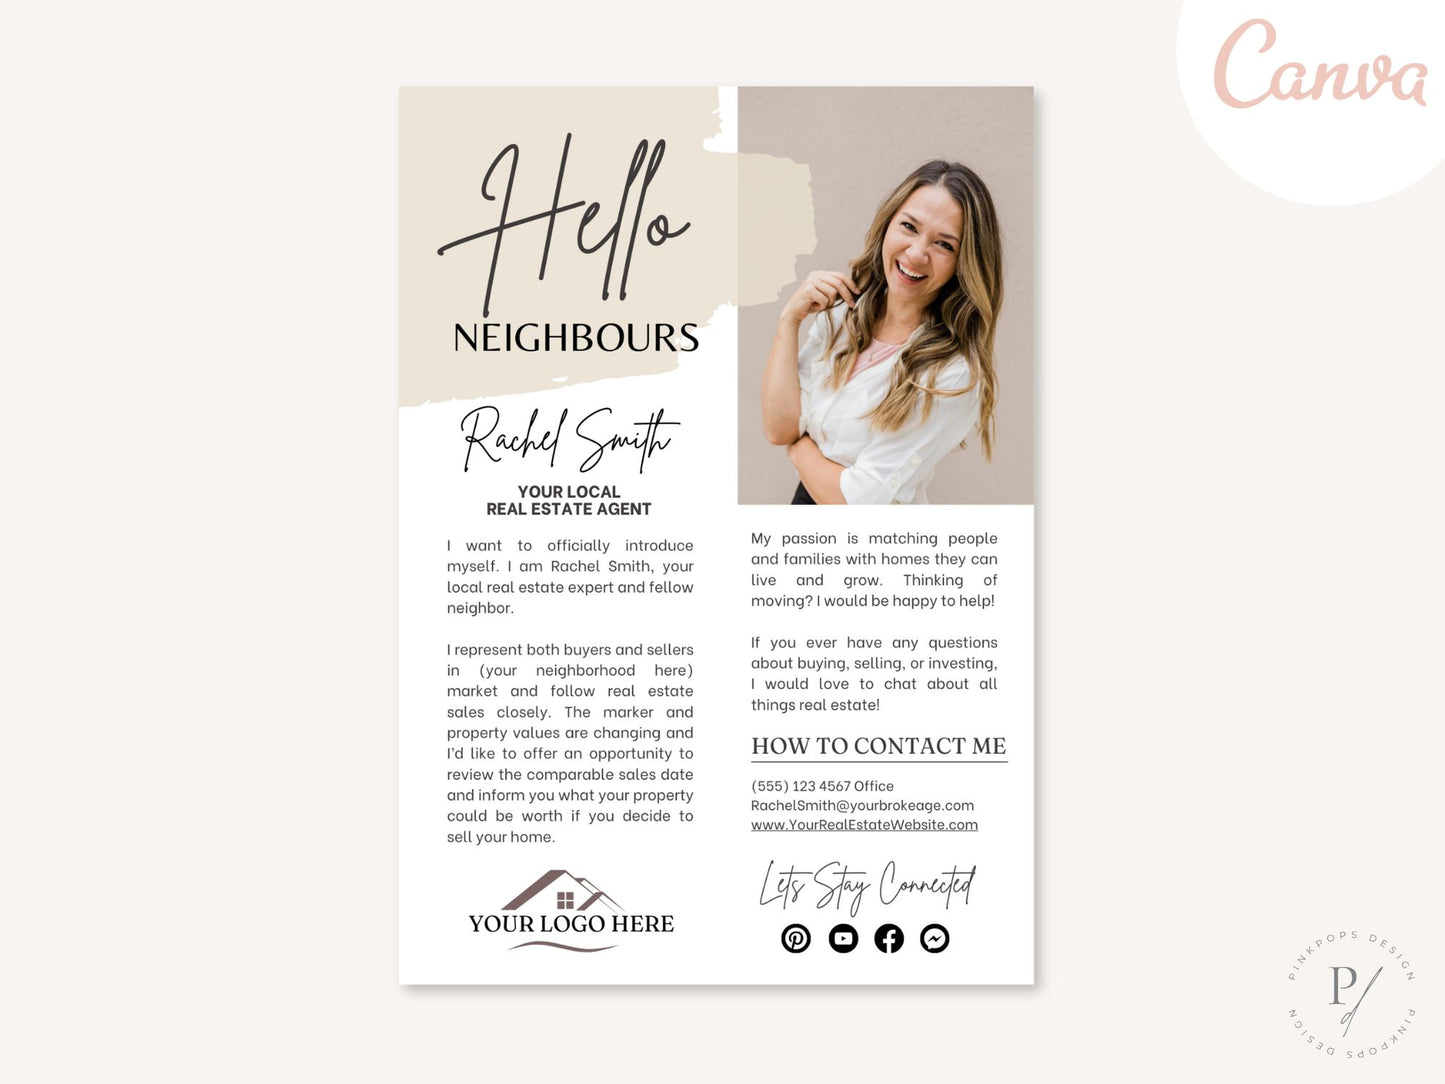 Hello Neighbors Real Estate Letter Vol 03 - Professionally designed real estate letter template for fostering connections with your community.